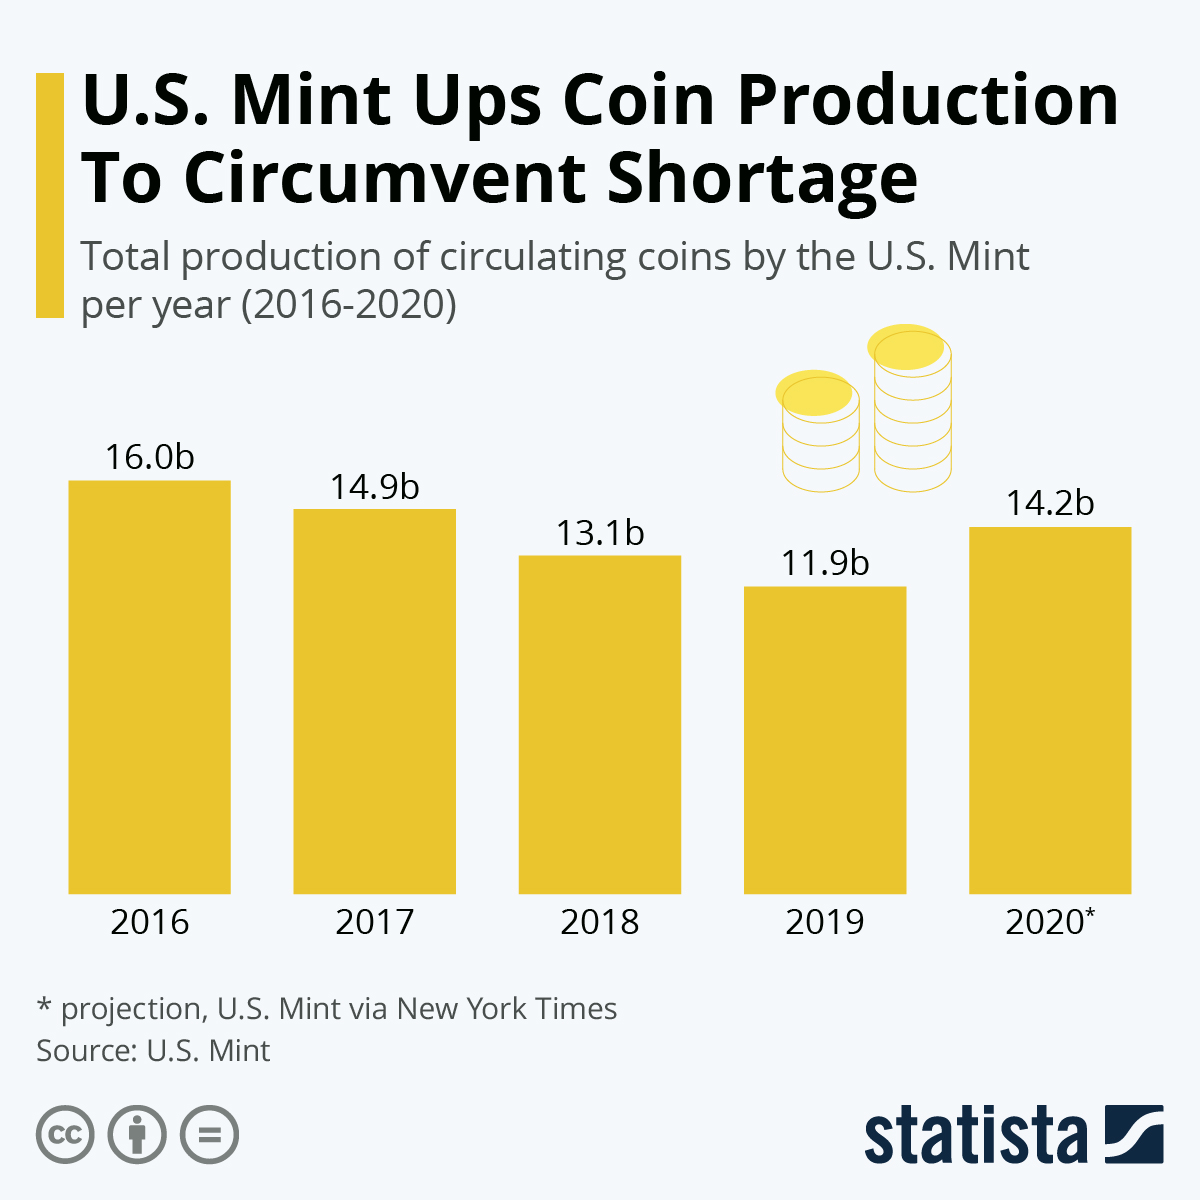 Is There Still A Coin Shortage Going On? Update | ICL